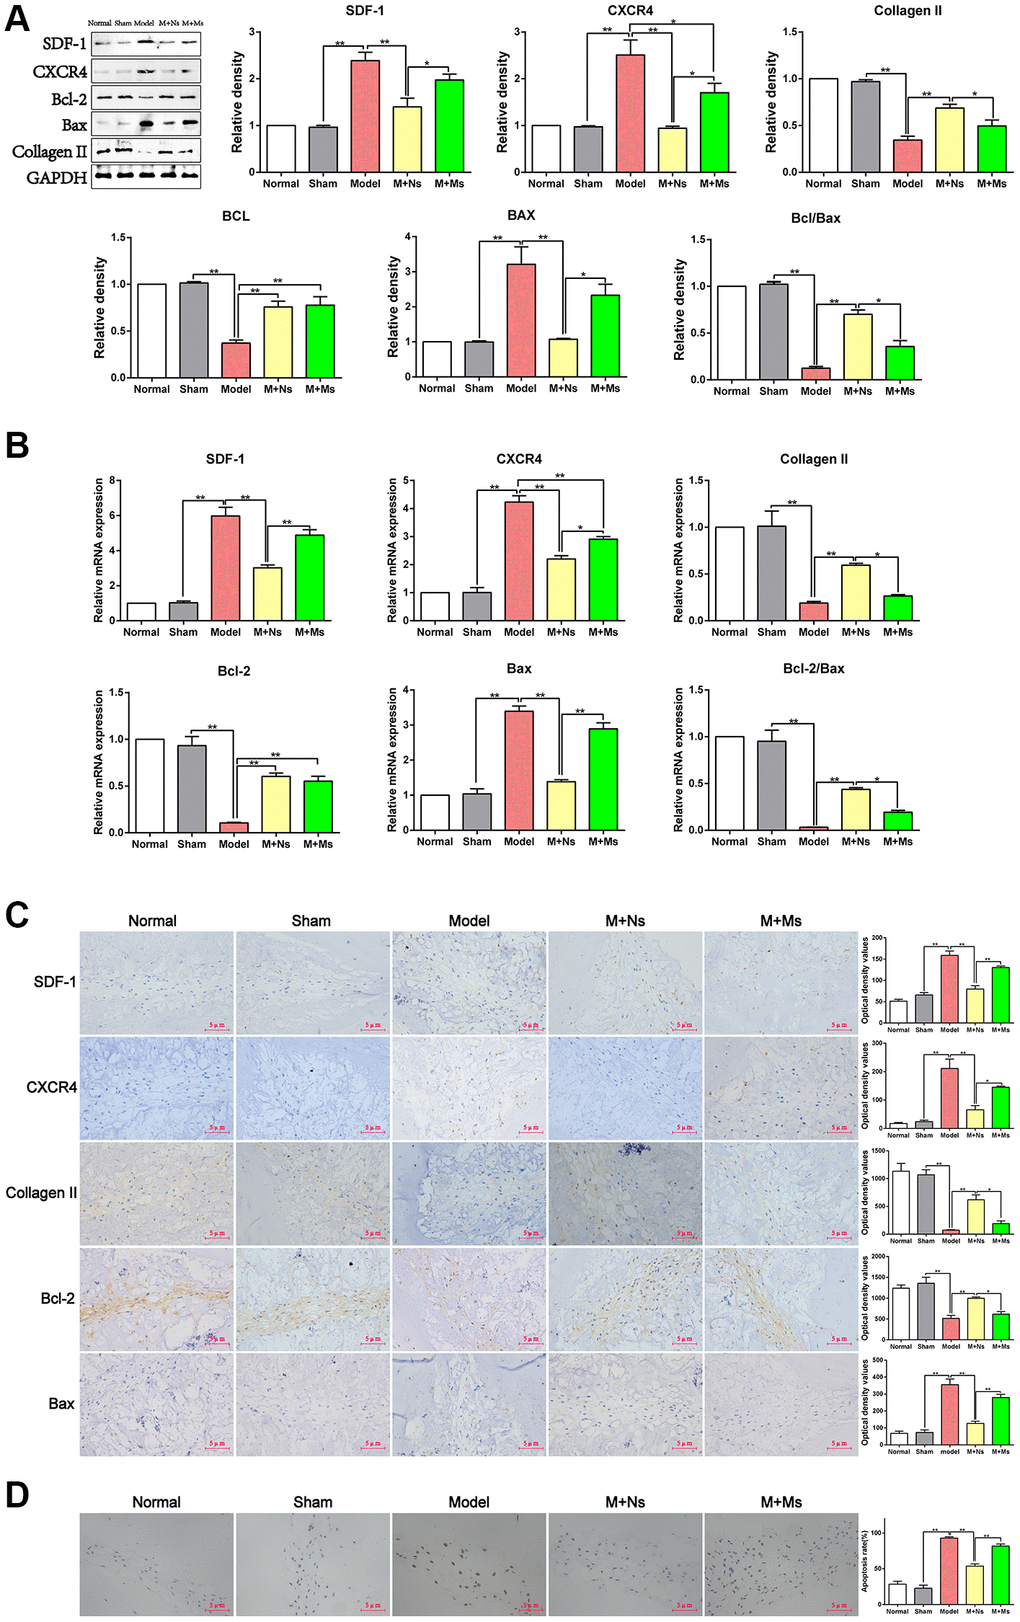 The therapy of Ns affected apoptosis of nucleus pulposus cells mediated by specifically regulating SDF-1/CXCR4 signal axis in the intervertebral disc of CS rats. (A) Western blot assay of SDF-1/CXCR4, Bcl-2/Bax and type II collagen in different groups 4 weeks after intervening. (B) Real-time PCR analysis of SDF-1/CXCR4, Bcl-2/Bax and type II collagen in different groups 4 weeks after intervening. (C) Immunohistochemical staining and optical density value of SDF-1/CXCR4, Bcl-2/Bax and type II collagen in different groups 4 weeks after intervening. (D) TUNEL staining to confirm the effect of 4 weeks of intervention on apoptosis of nucleus pulposus cells in different groups. Note: scale bar = 5 um, values are means ± SEMs, n = 5 per group, *p **p 